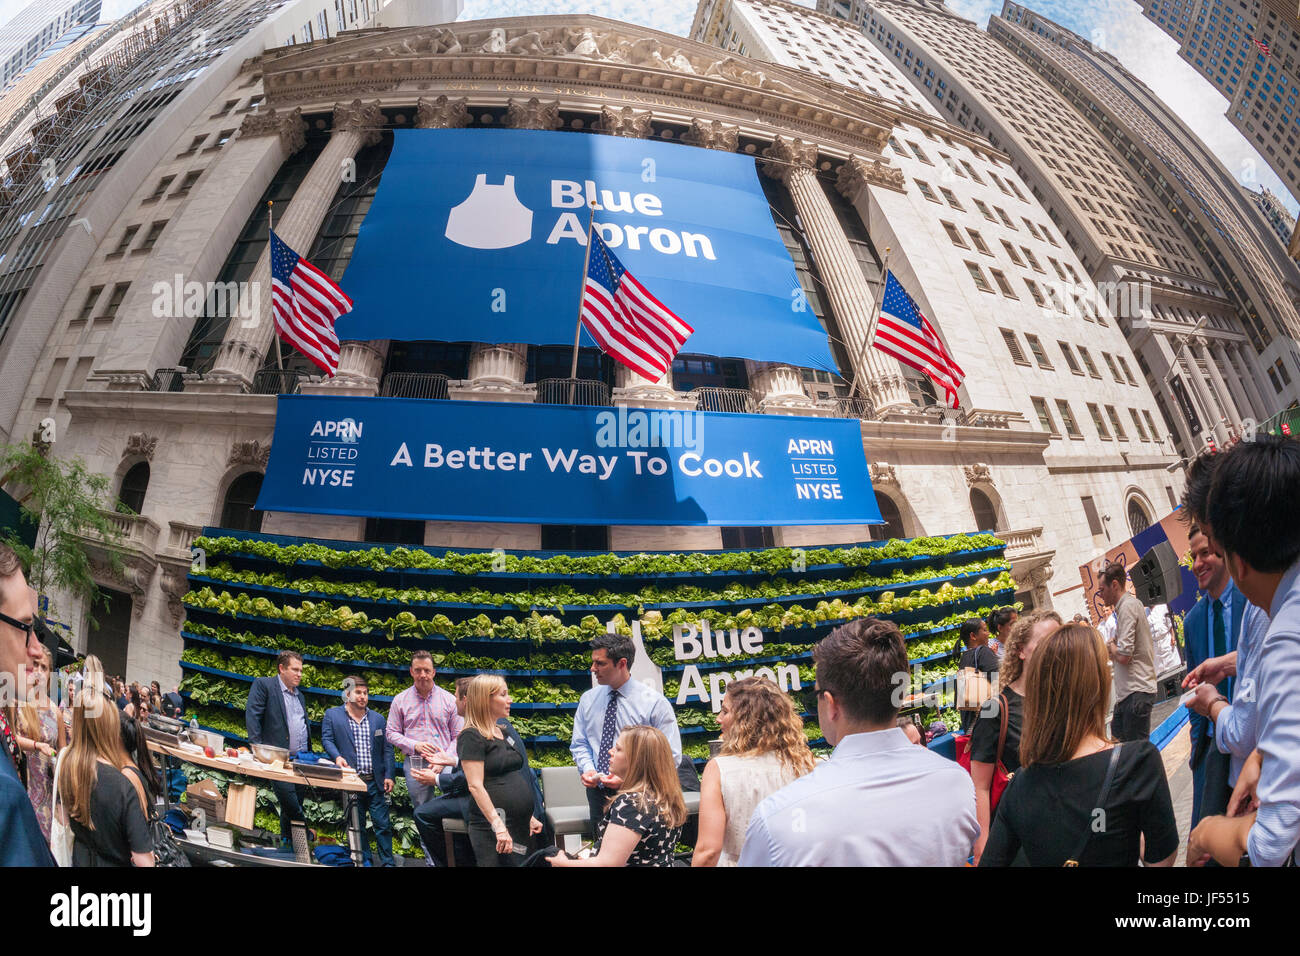 New York, USA. 29th June, 2017. Broad Street in front of the New York Stock Exchange is agog with activity during the ceremony for the initial public offering of Blue Apron Holdings, a meal-kit delivery service, on Thursday, June 29, 2017. Blue Apron Holdings Inc. reduced the price of its initial public offering because of the possible impact of the Amazon-Whole Foods Market acquisition. Blue Apron is one of several meal-kit delivery services but the first to have an IPO. ( © Richard B. Levine) Credit: Richard Levine/Alamy Live News Stock Photo